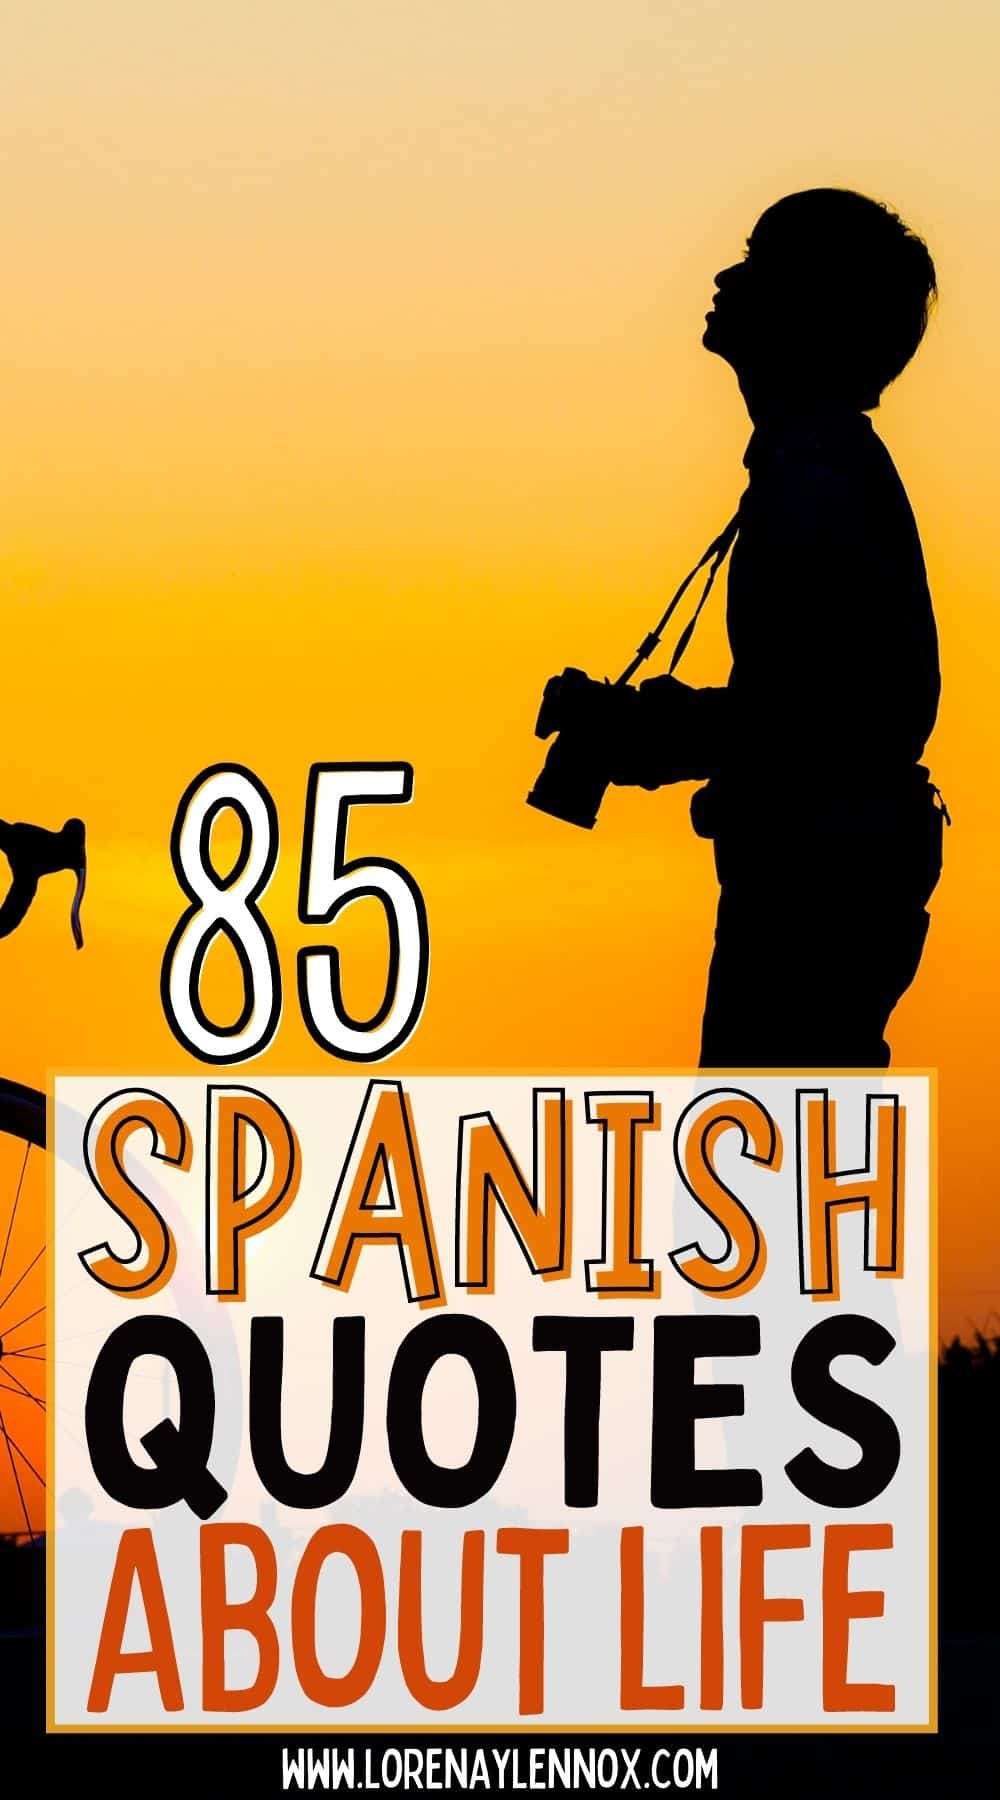 85+ Spanish Quotes About Life with English translation